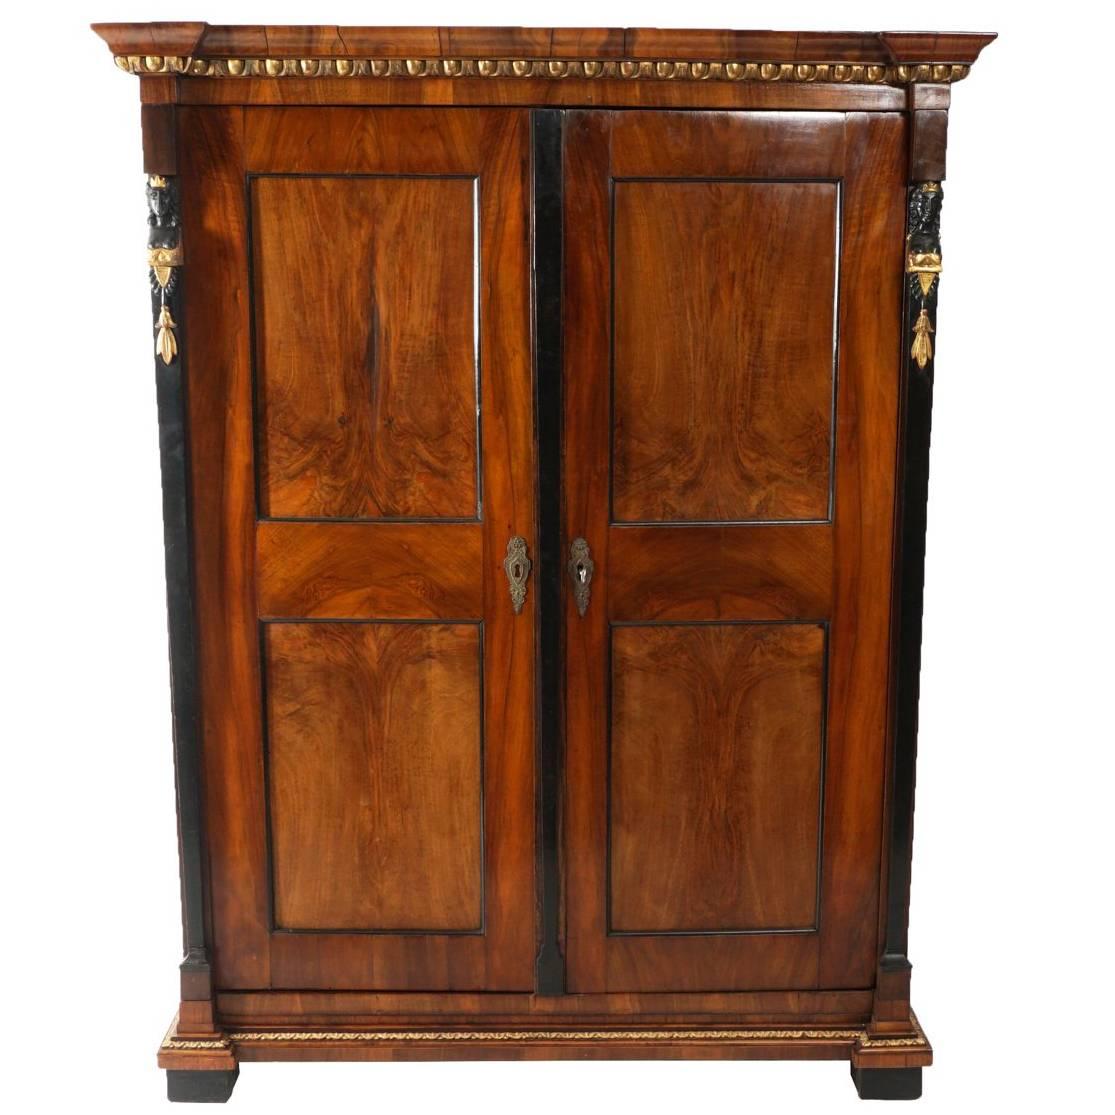 Egyptian Revival Cabinet